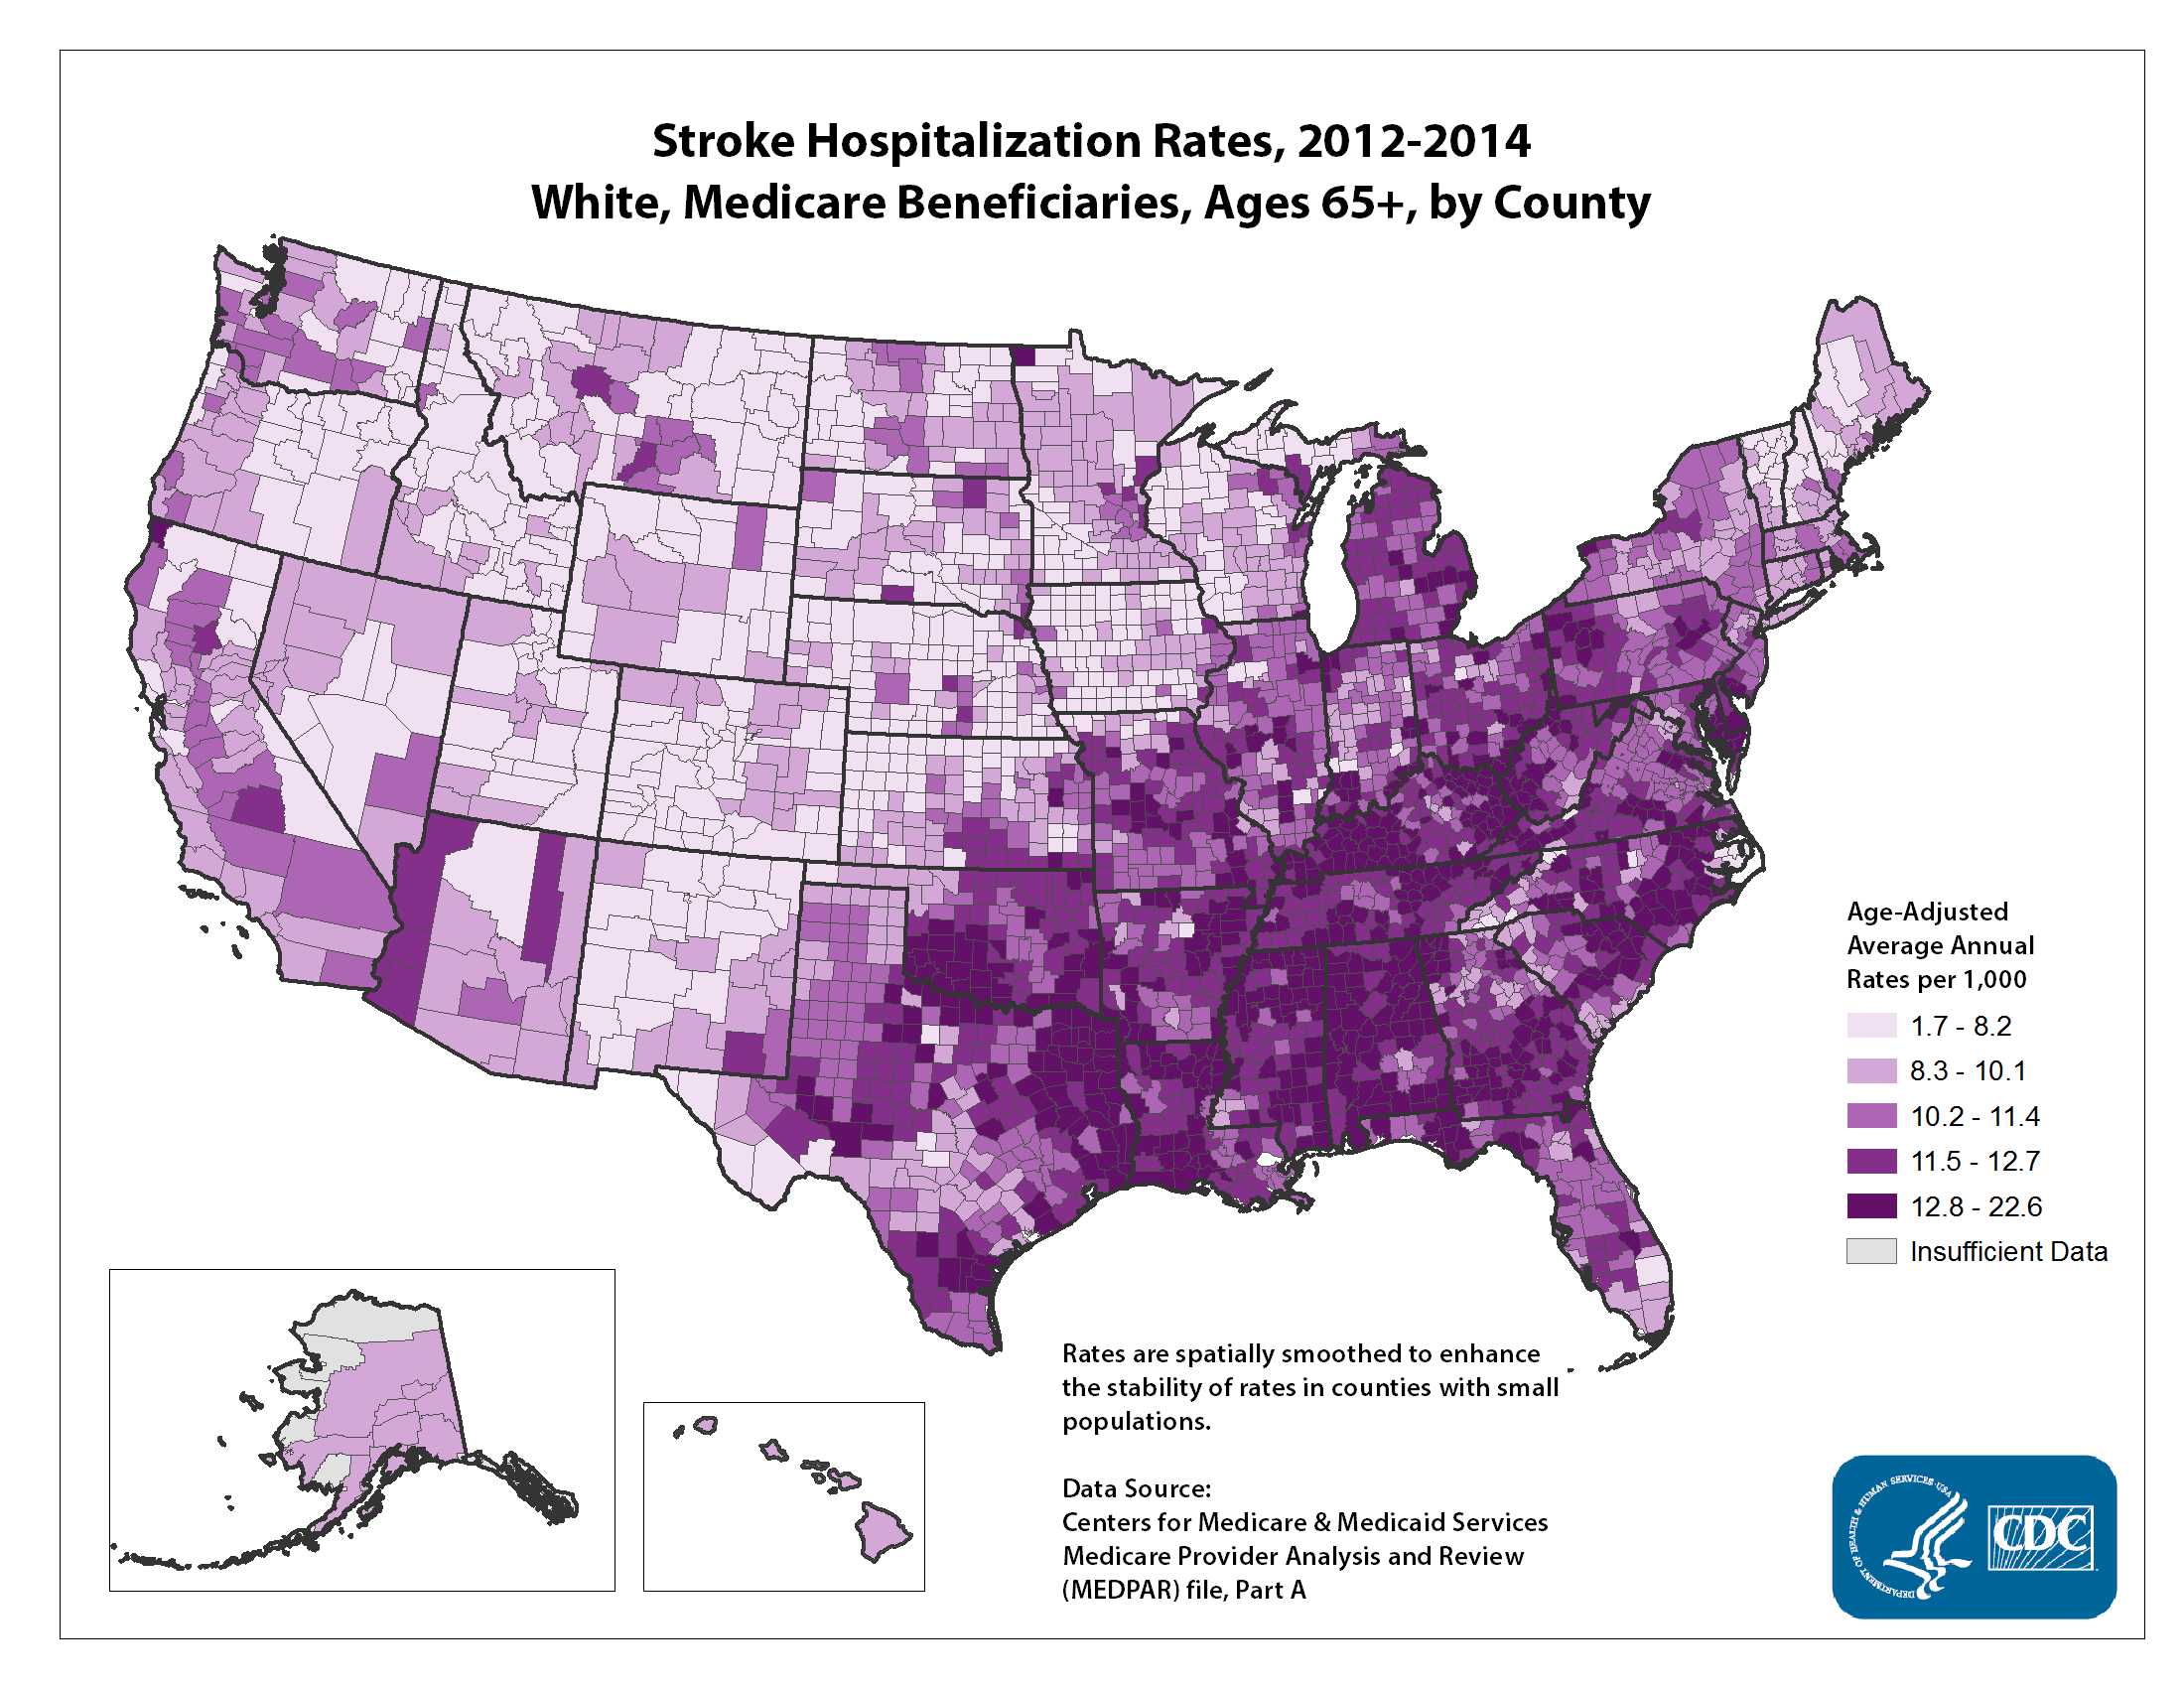 Stroke Hospitalization Rates for 2010 through 2012 for Whites Aged 65 Years and Older by County. The map shows that concentrations of counties with the highest stroke hospitalization rates - meaning the top quintile - are located primarily in the Southeast, with heavy concentrations of high-rate counties in Alabama, Mississippi, and Louisiana. Pockets of high-rate counties also are found in West Virginia, Kentucky, Tennessee, Arkansas, Oklahoma, parts of Texas, and along the coastal plains of North Carolina, South Carolina, and Georgia.